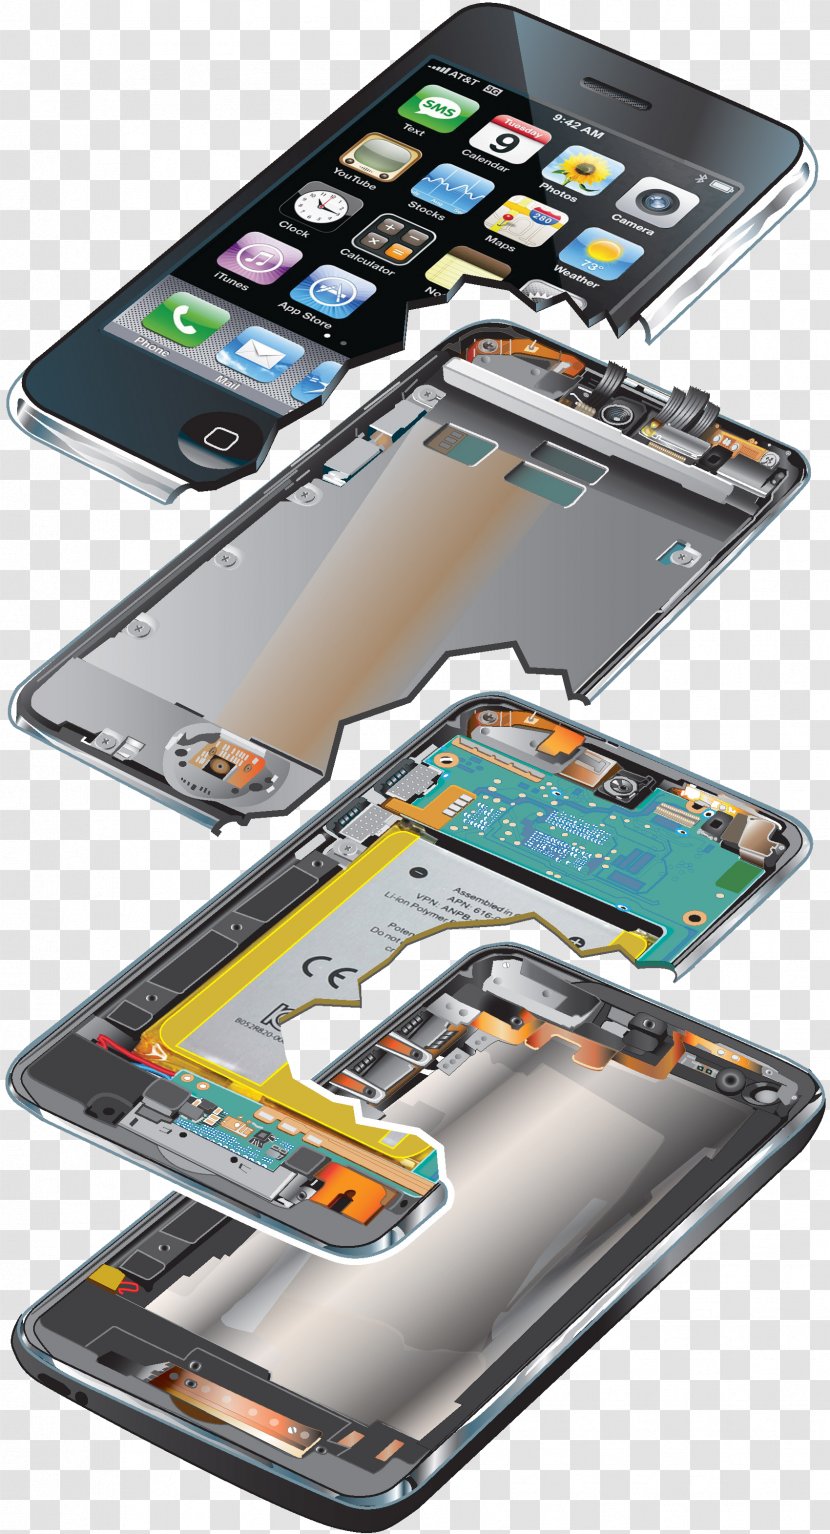 Smartphone Mobile Phones Exploded-view Drawing Technical Illustration - Explodedview Transparent PNG